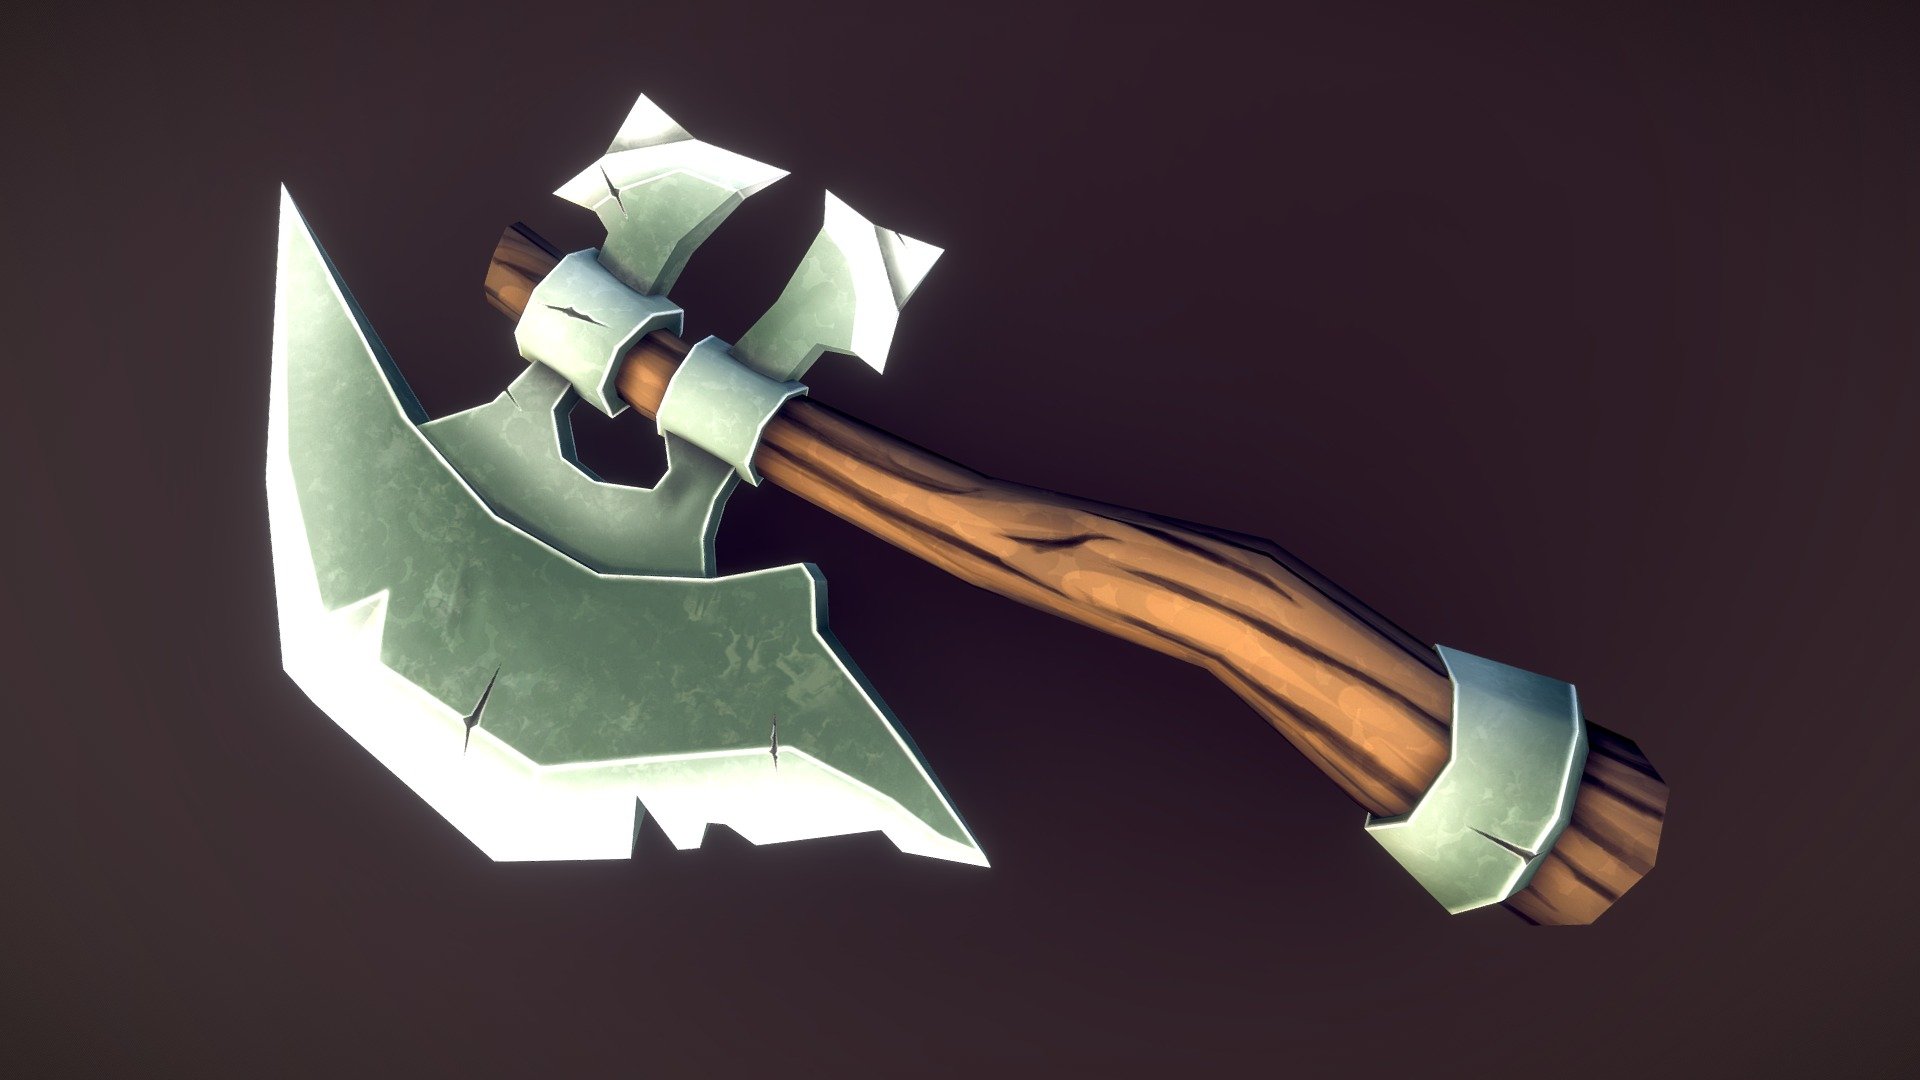 For more models and files like this, don't forget to follow!
Any tips for me to apply to future models?

This stylized axe was made with a very small amount of polygons to be used in game engines without any problem. Its 1024x1024 texture was hand painted on the substance painter and is mirrored.

If you want change the axe texture, you can edit the photoshop file! There you can separately edit the details, the Ambient occlusion, the color and the black and white painting
https://drive.google.com/drive/folders/1Ah18JWVa5bm2IFrDaCXffI5hSMtWvsnz?usp=sharing - Stylized medieval axe hand-painted (Free) - Download Free 3D model by EduardoIkeda 3d model